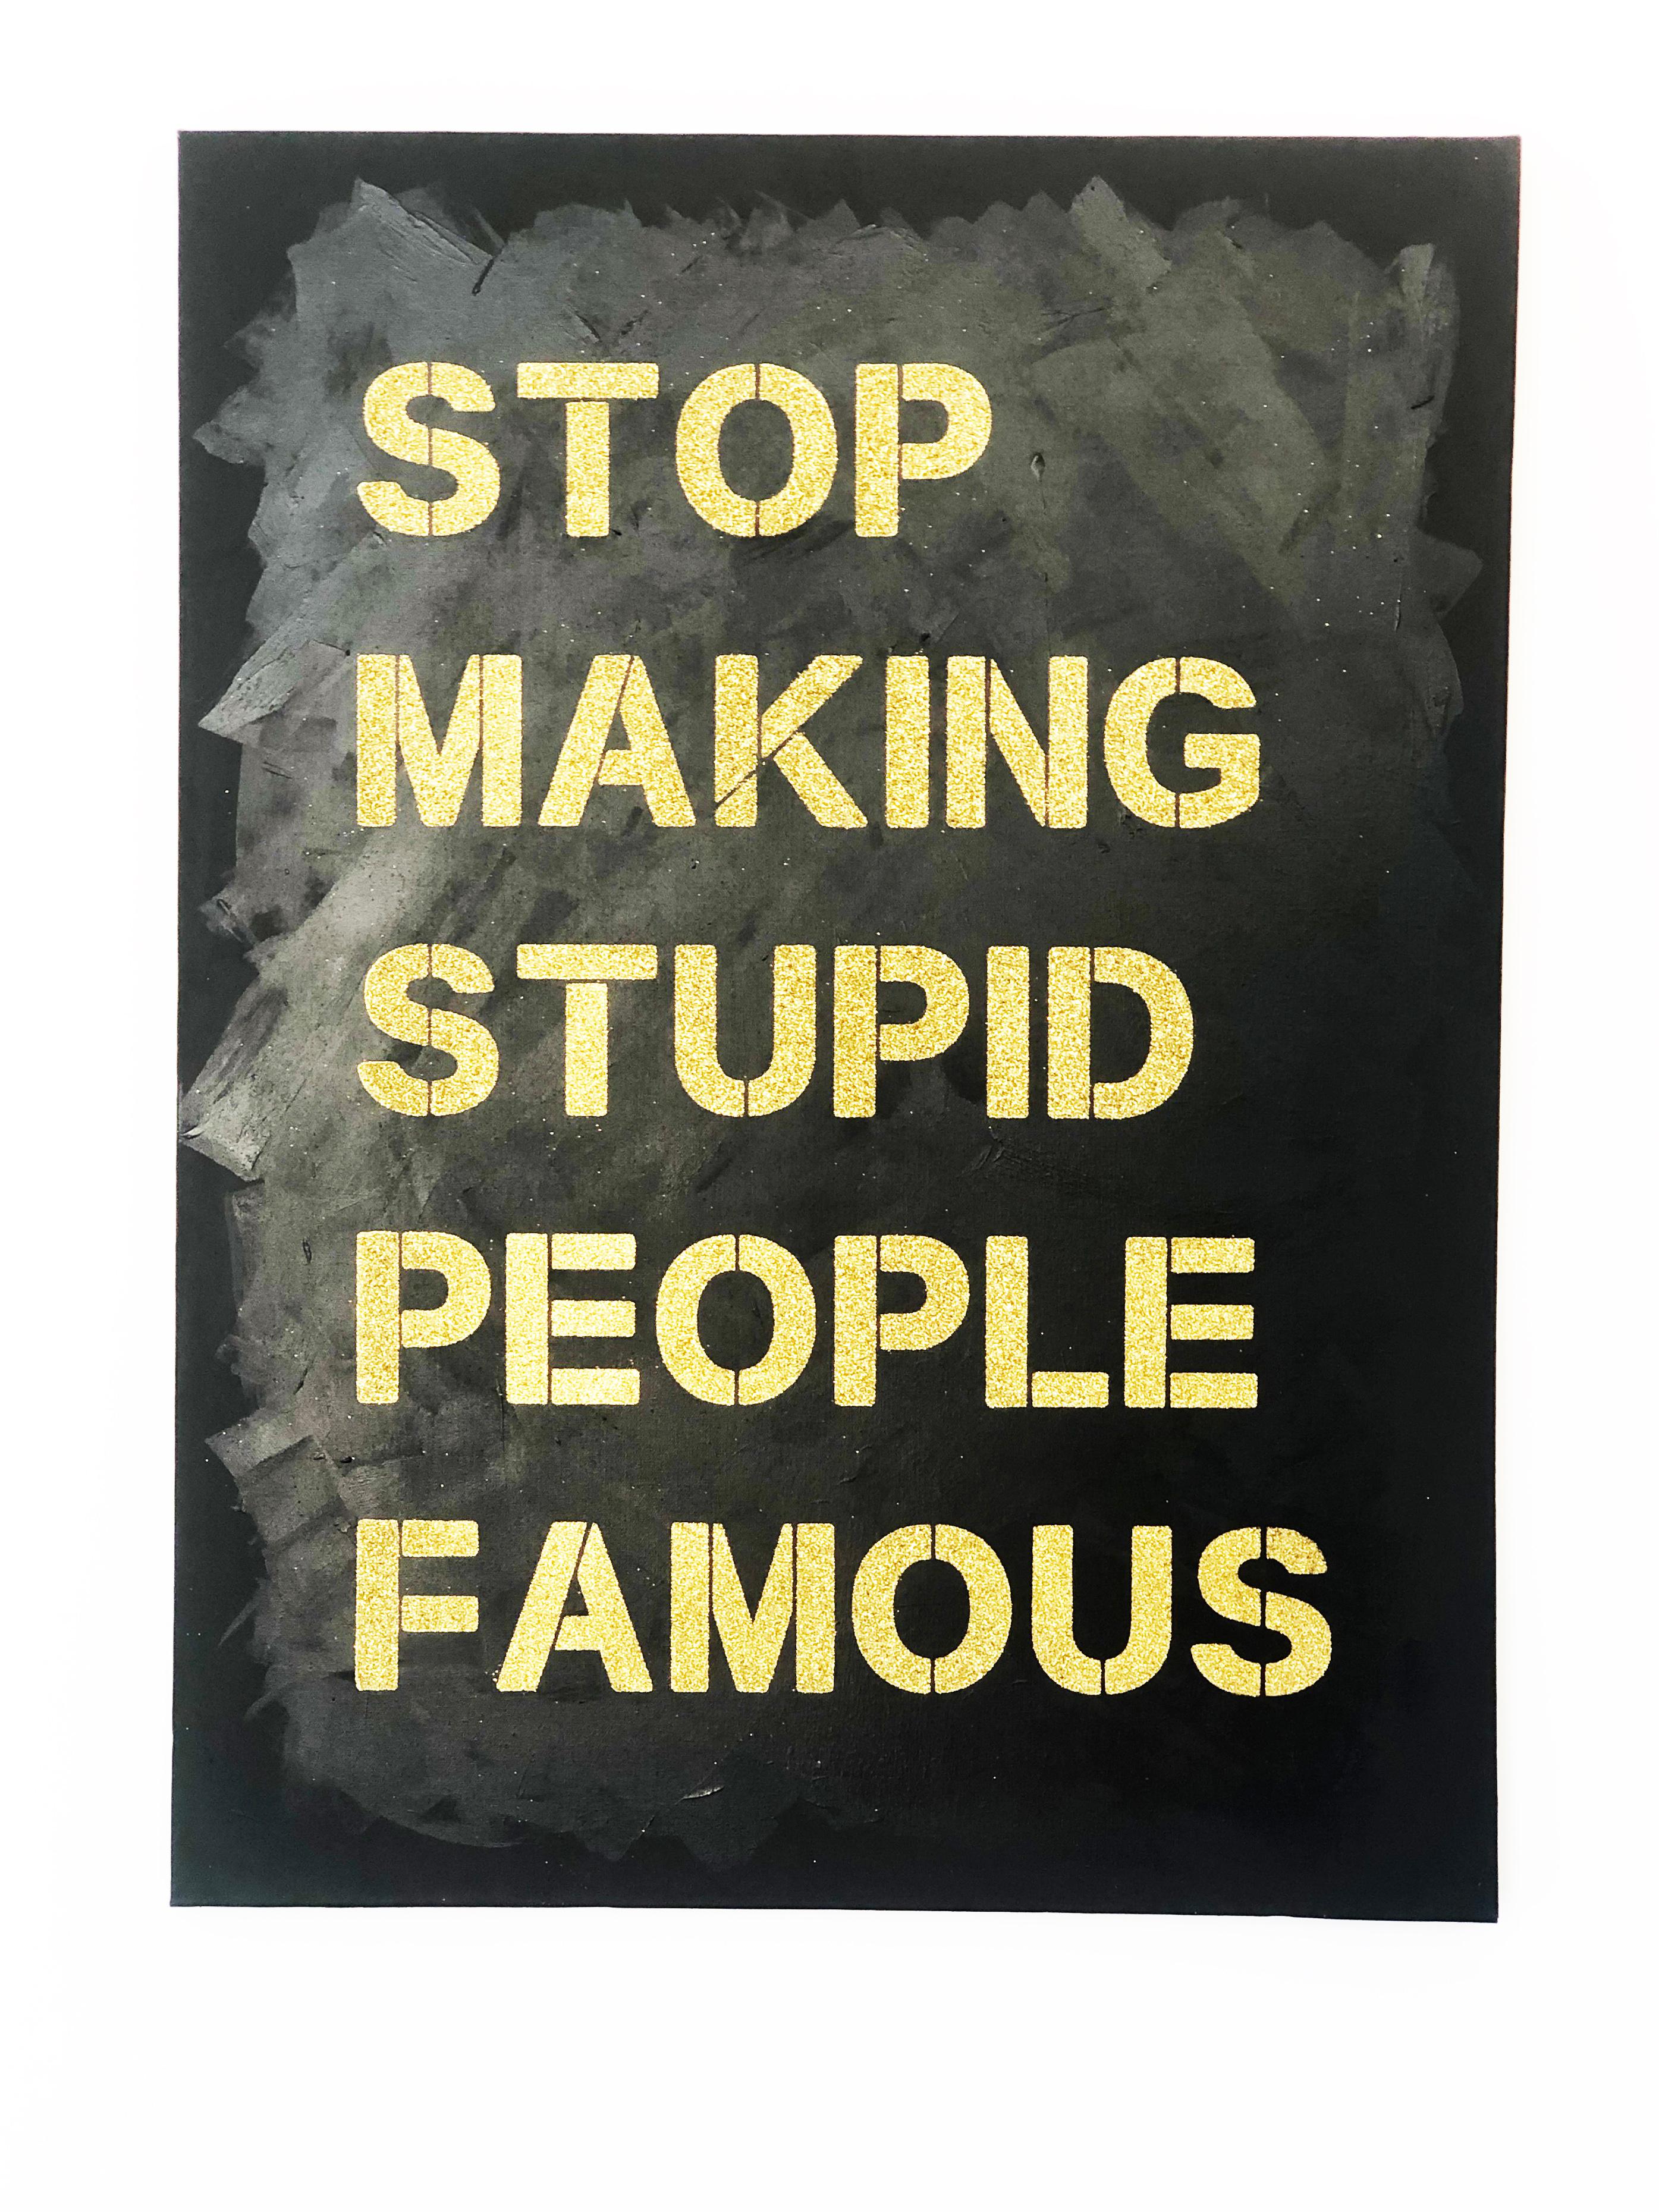 "Stop Making Stupid People Famous" -gold on black diamond dust stencil on canvas - Painting by Plastic Jesus